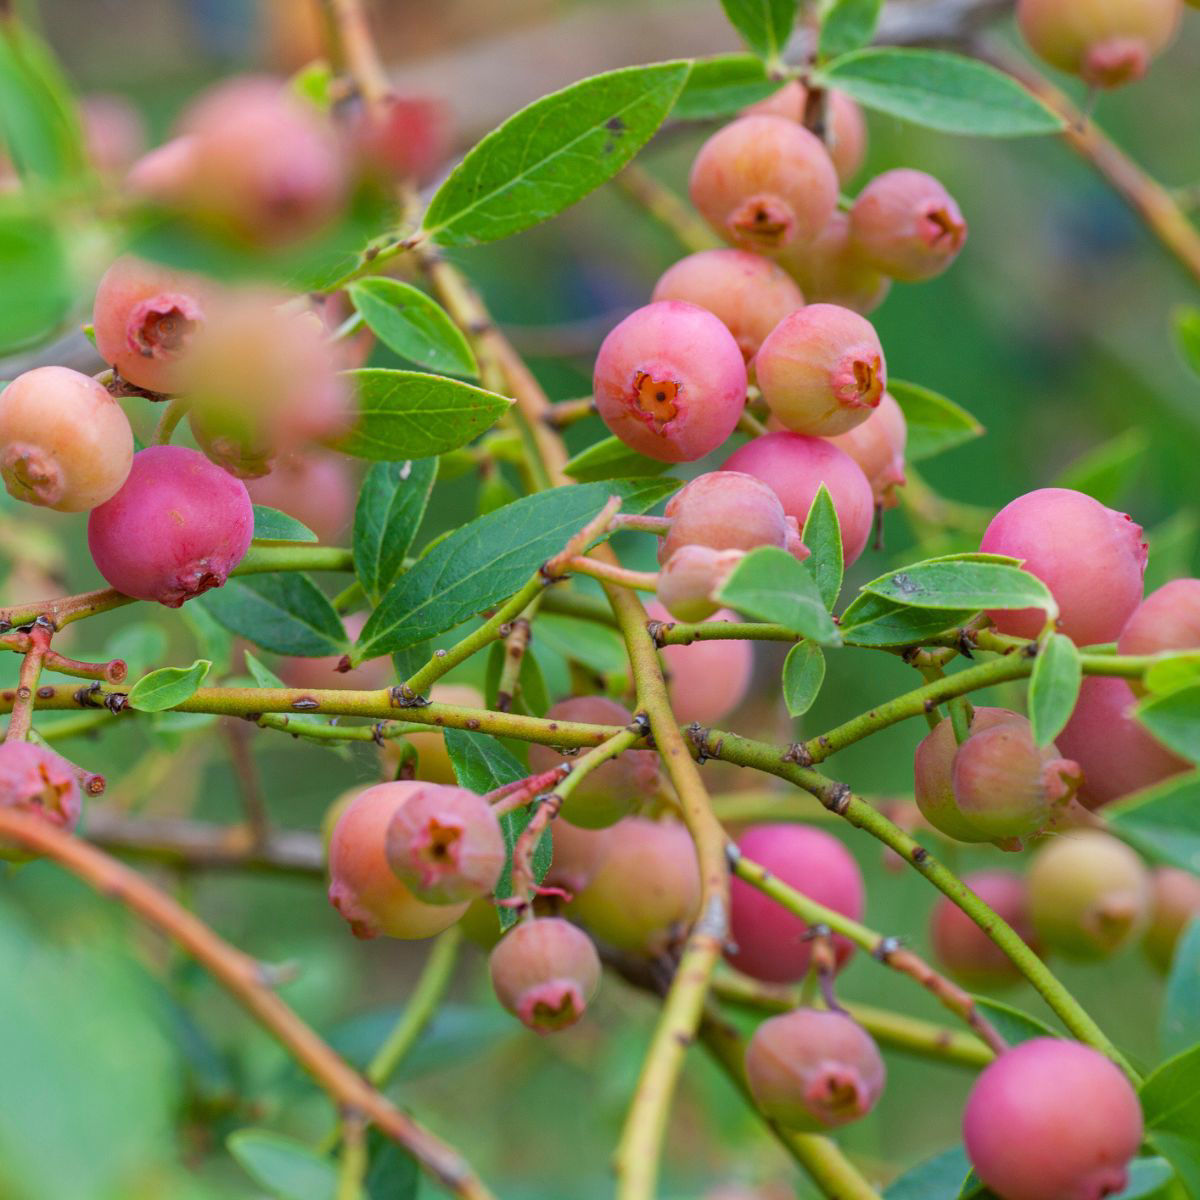 Pink Lemonade Blueberry Bushes for Sale at Arbor Day's Online Tree Nursery  - Arbor Day Foundation